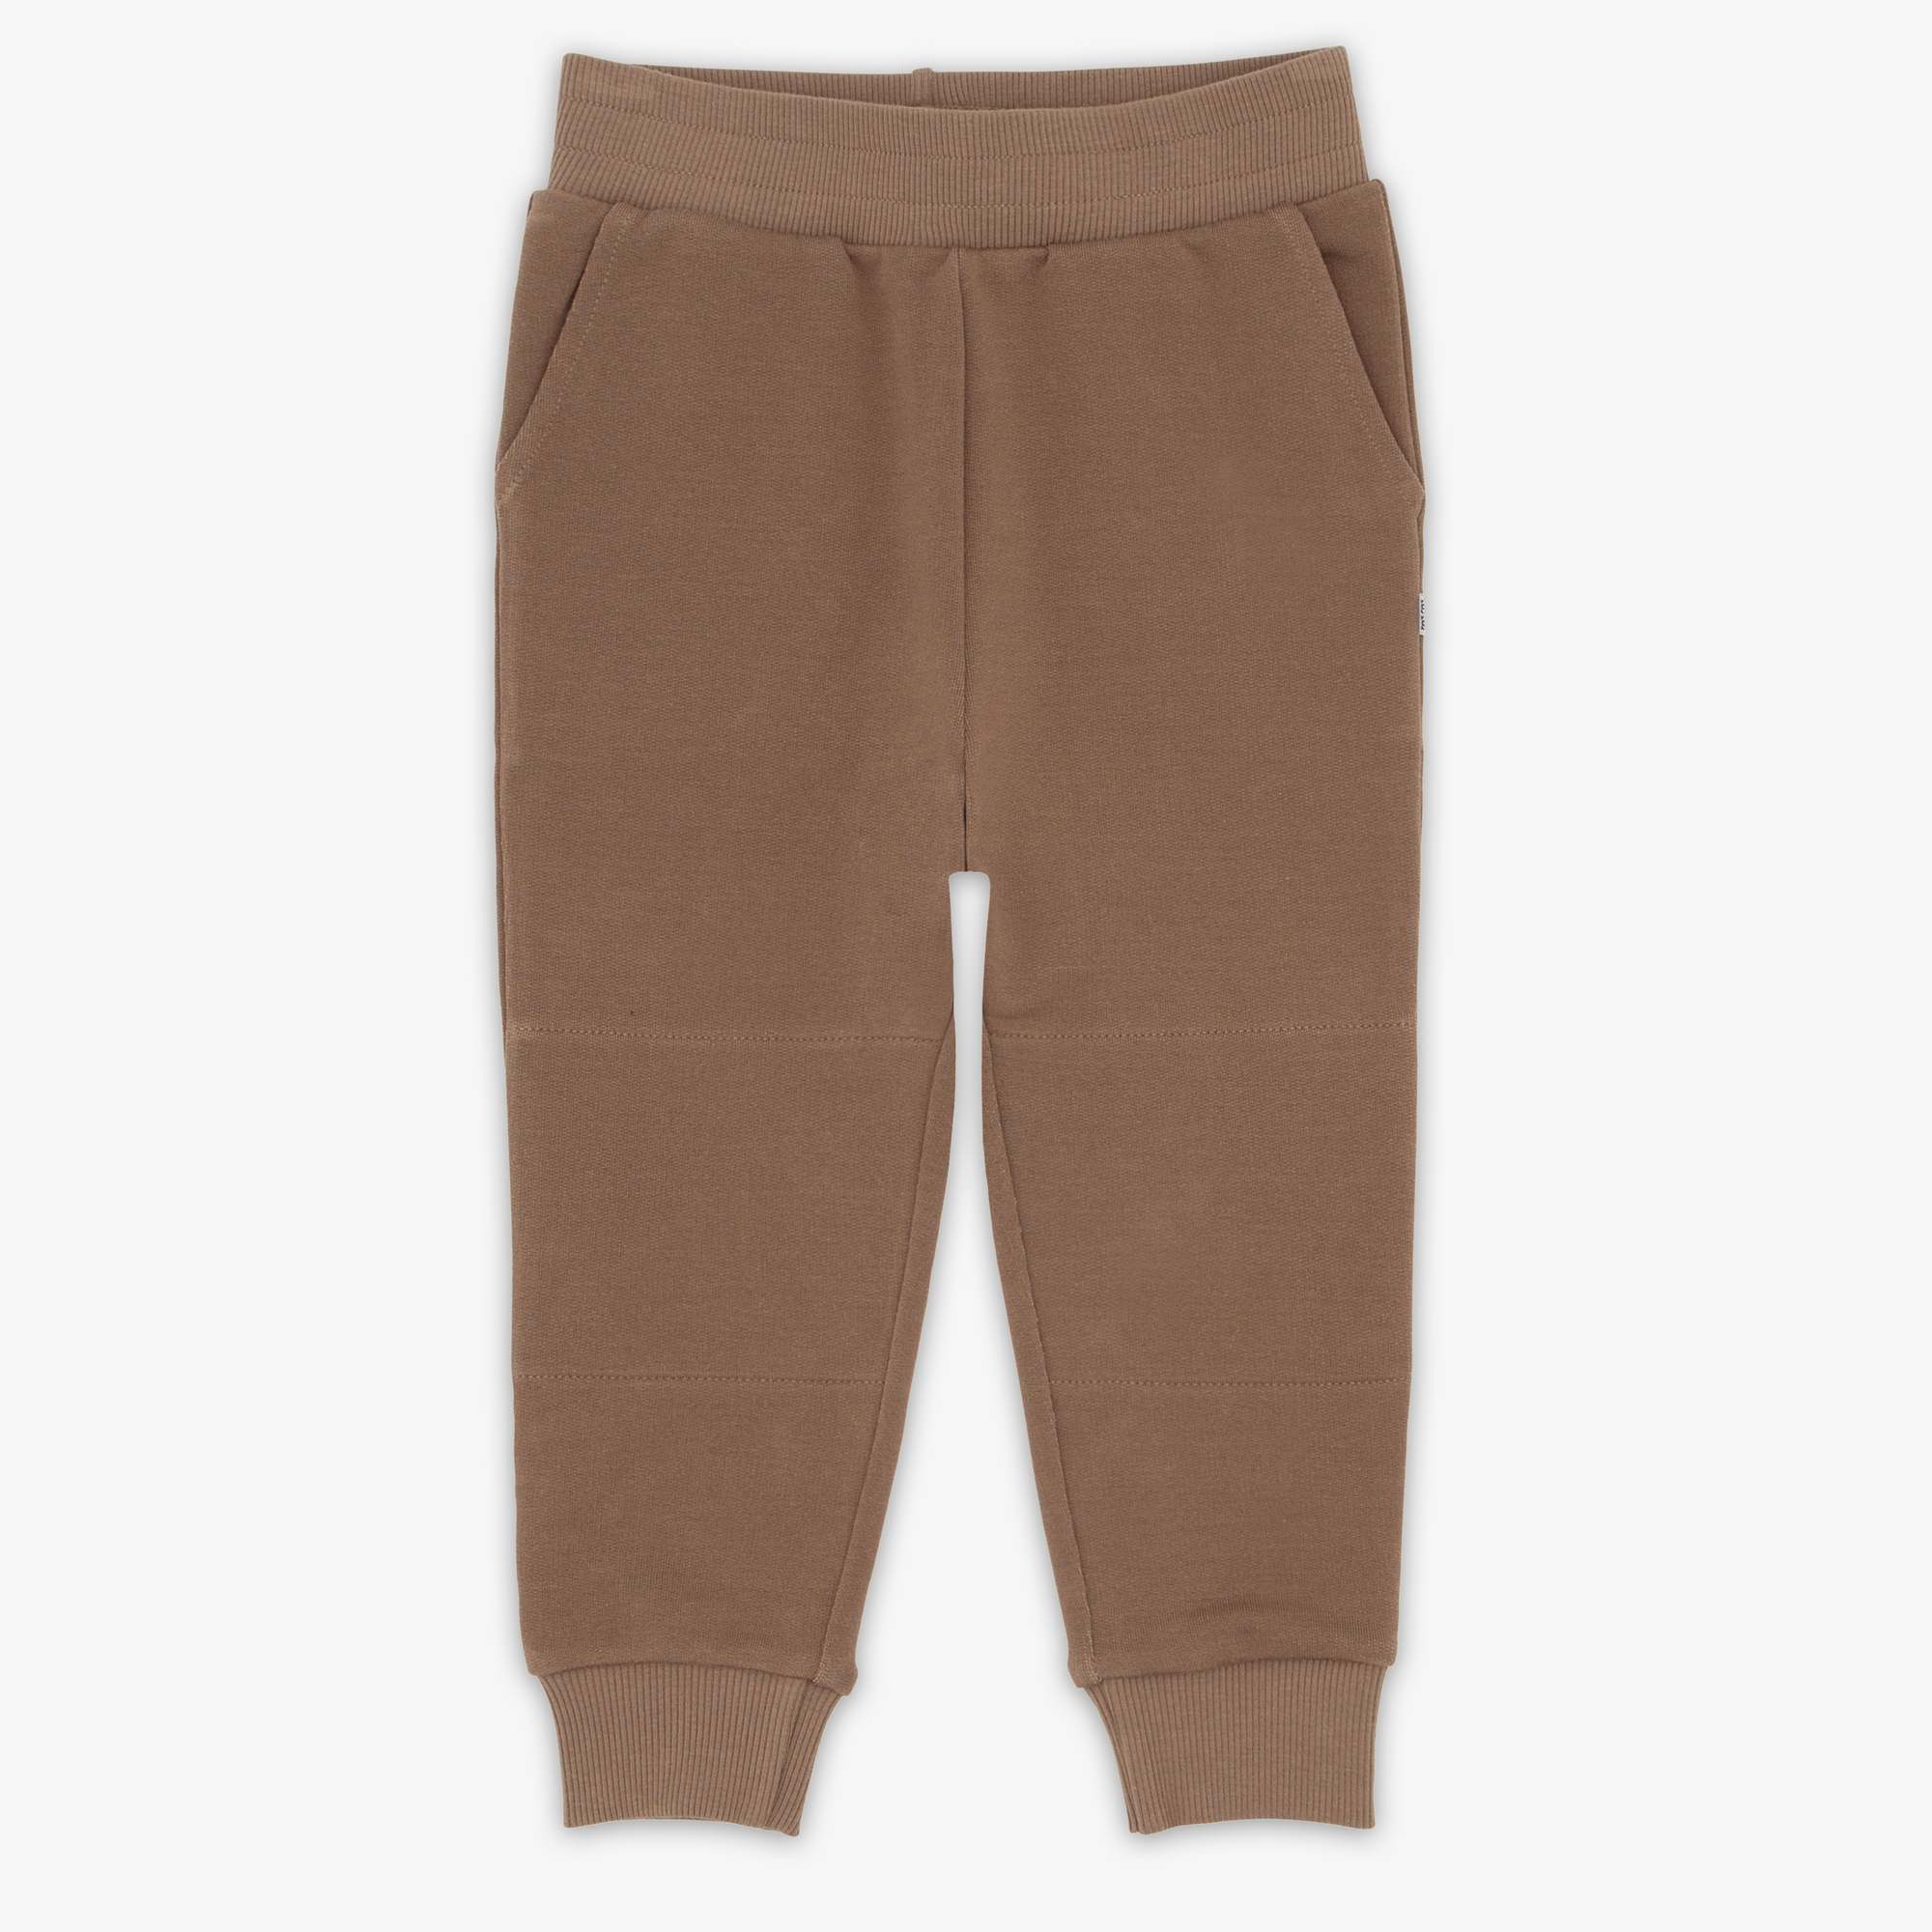 Flat lay image of the Vintage Brown Jogger